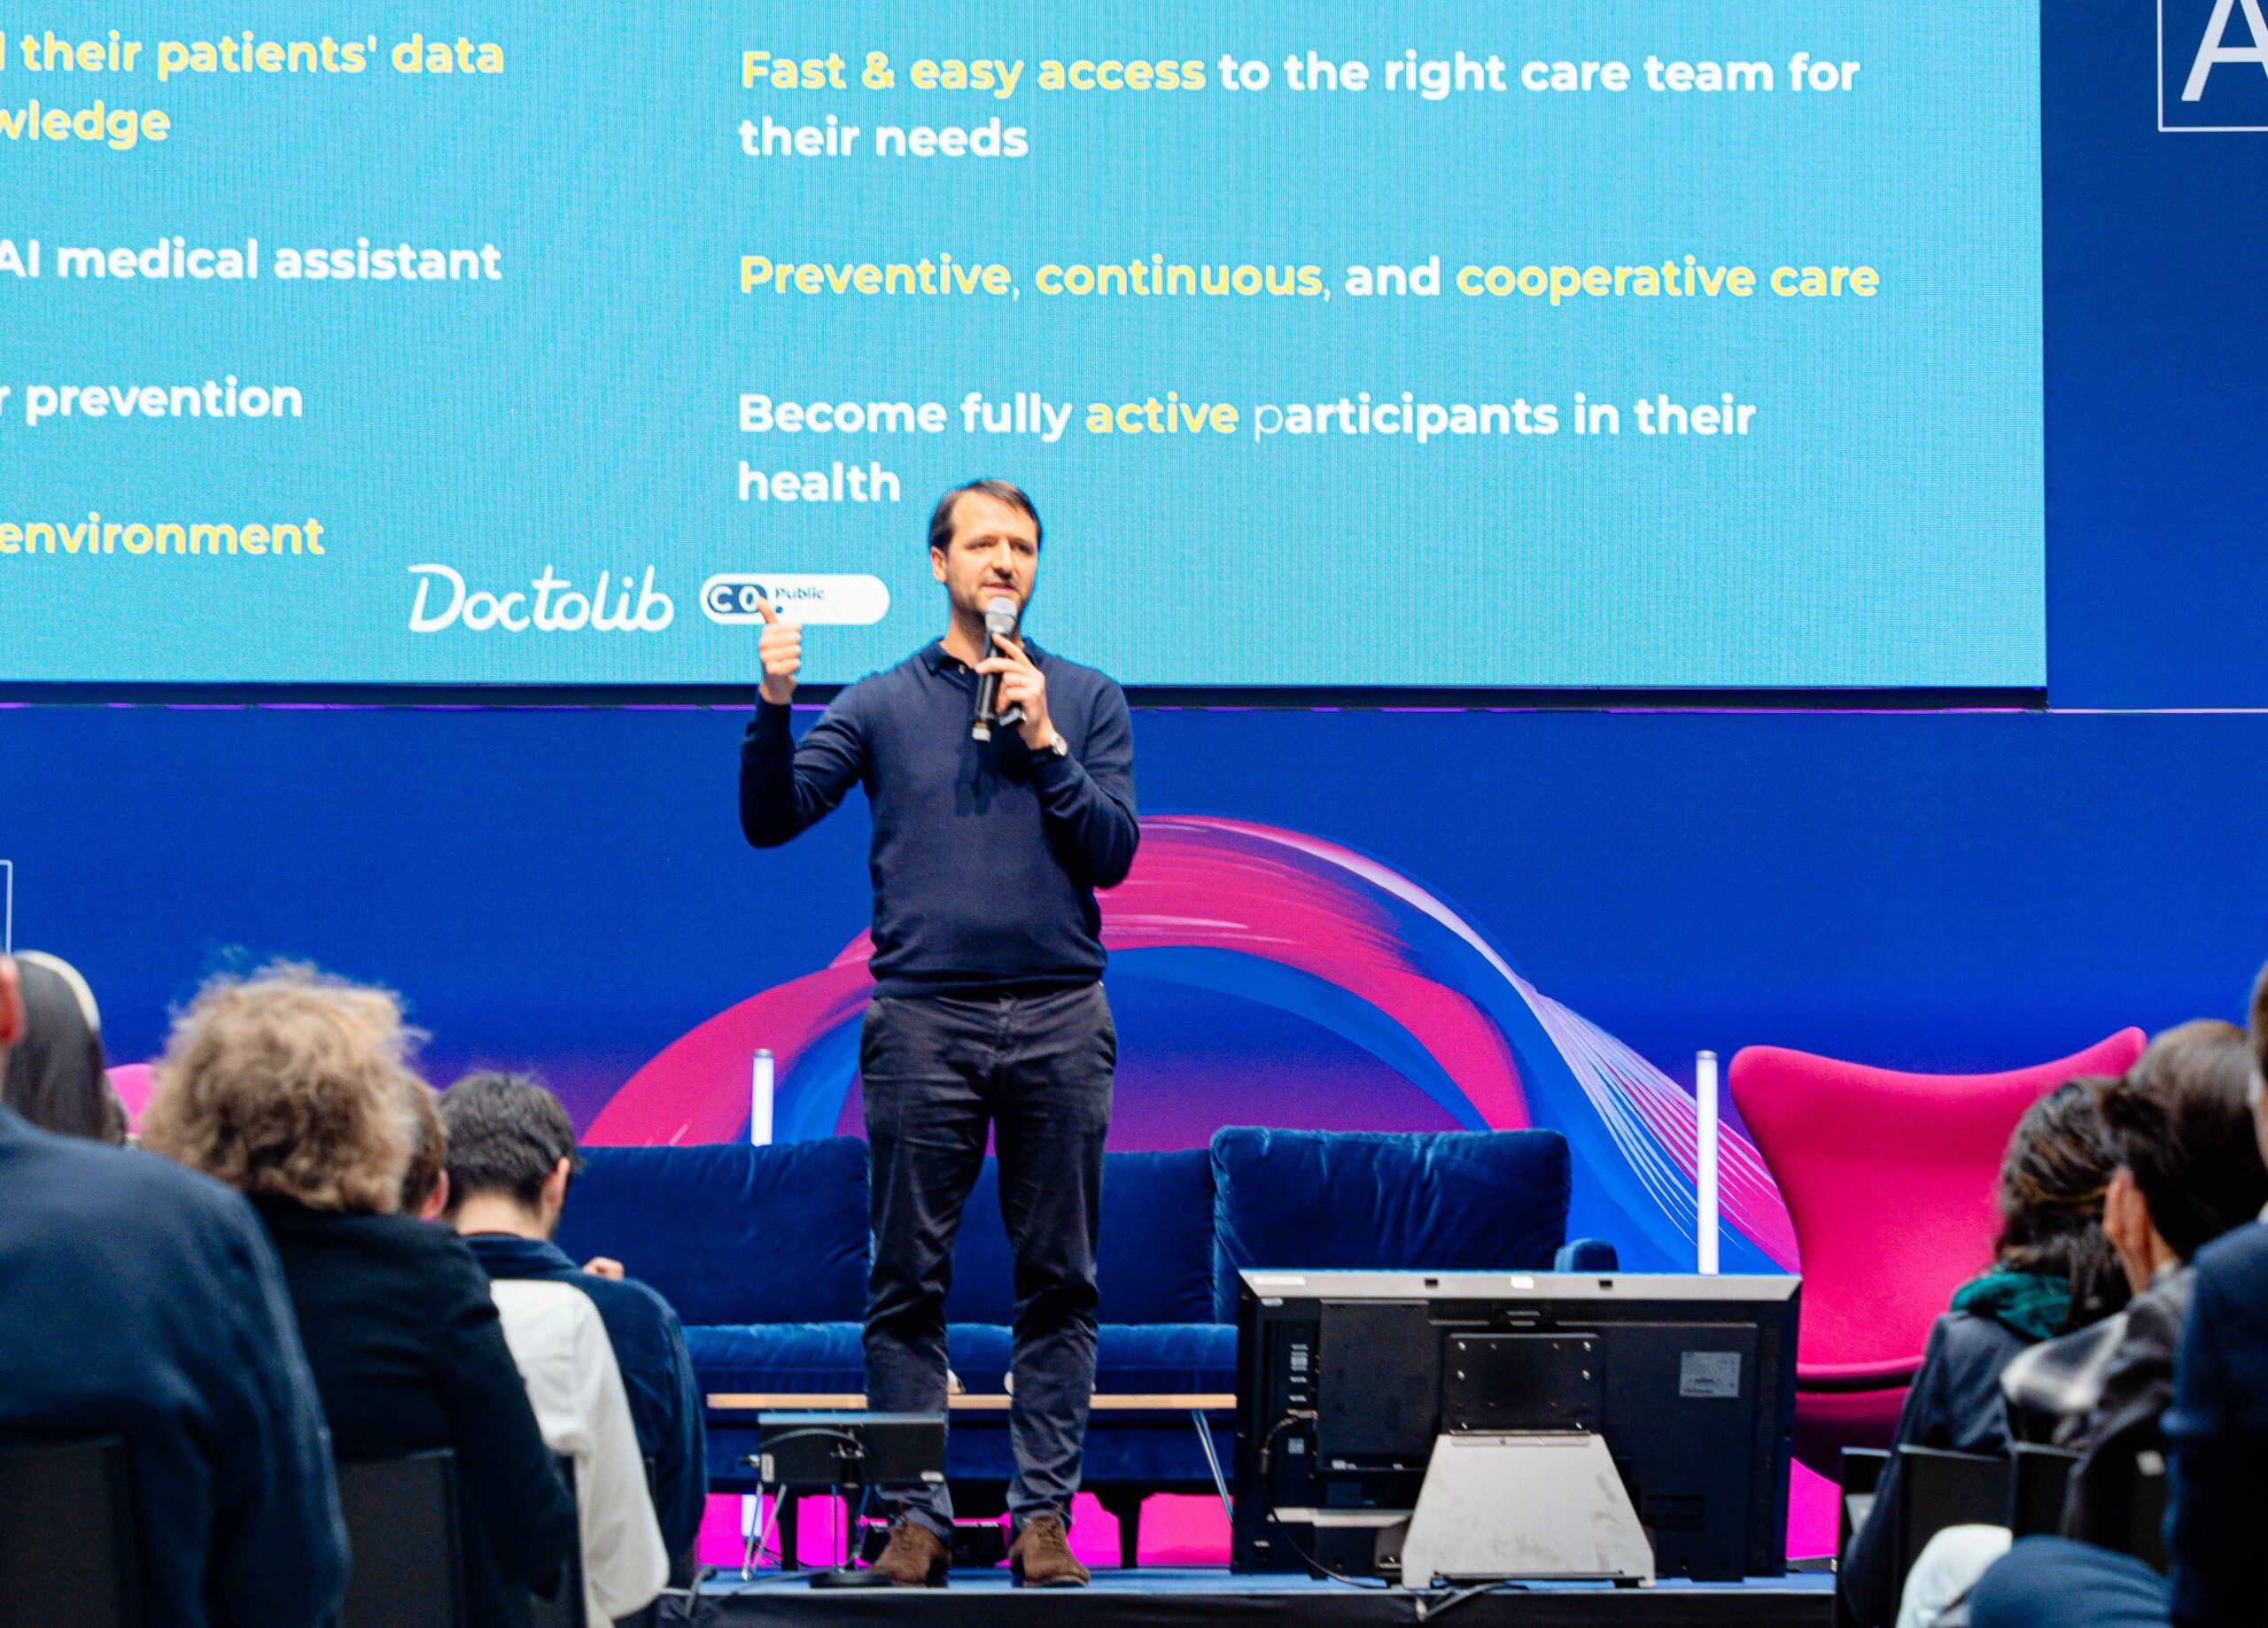 Stanislas Niox-Chateau, CEO of DOCTOLIB at the Adopt AI Summit – Building the healthcare we all dream of, thanks to AI